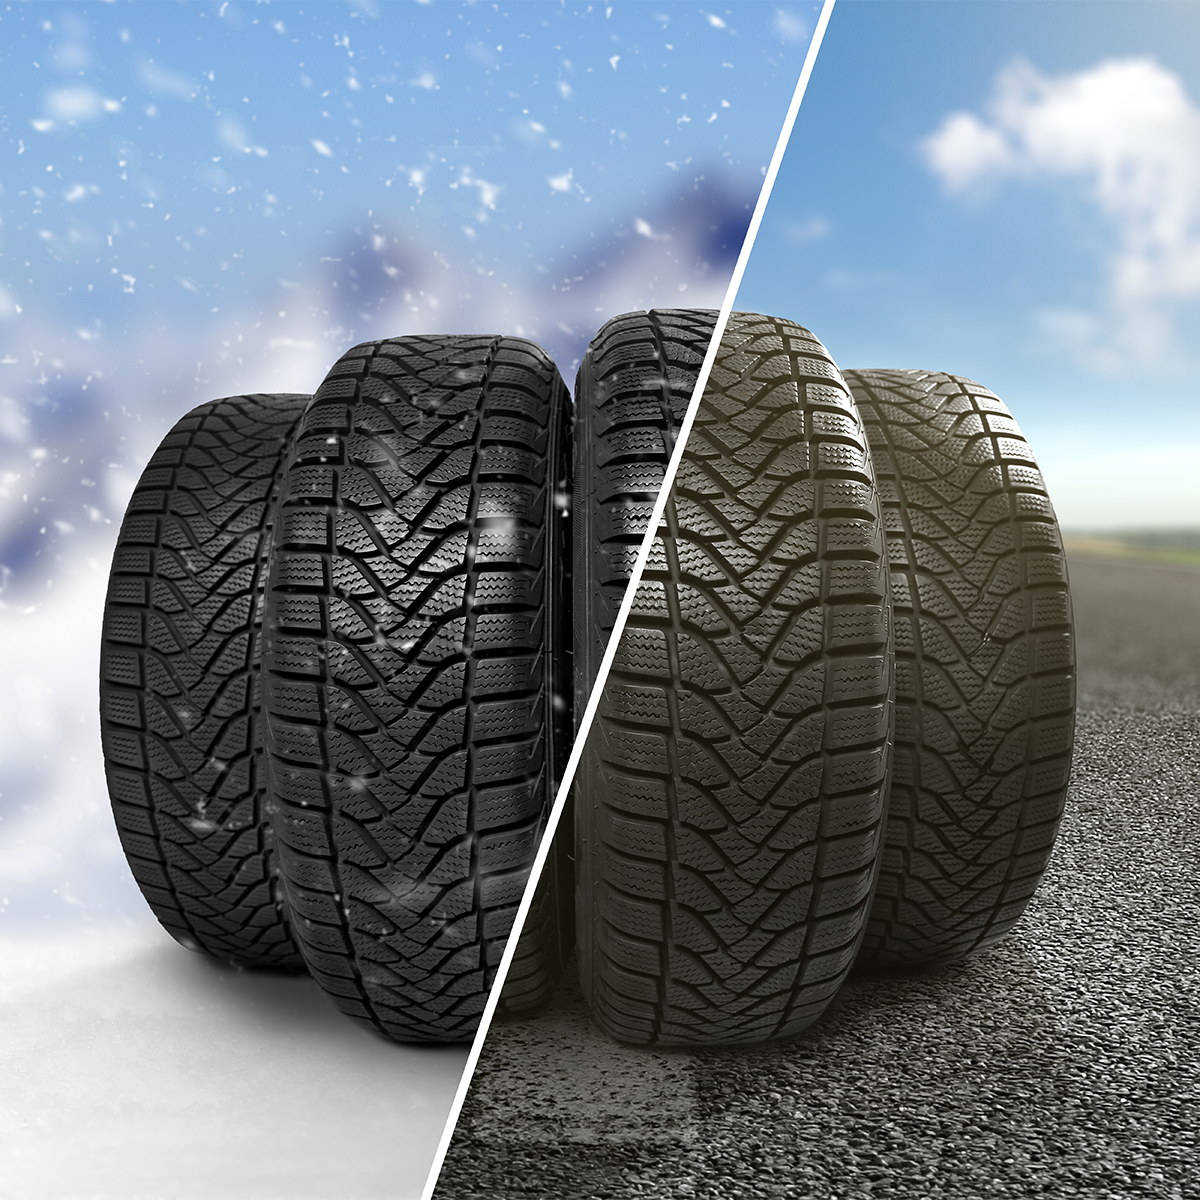 It’s time to switch to summer tires – check out our tyre mounting paste!